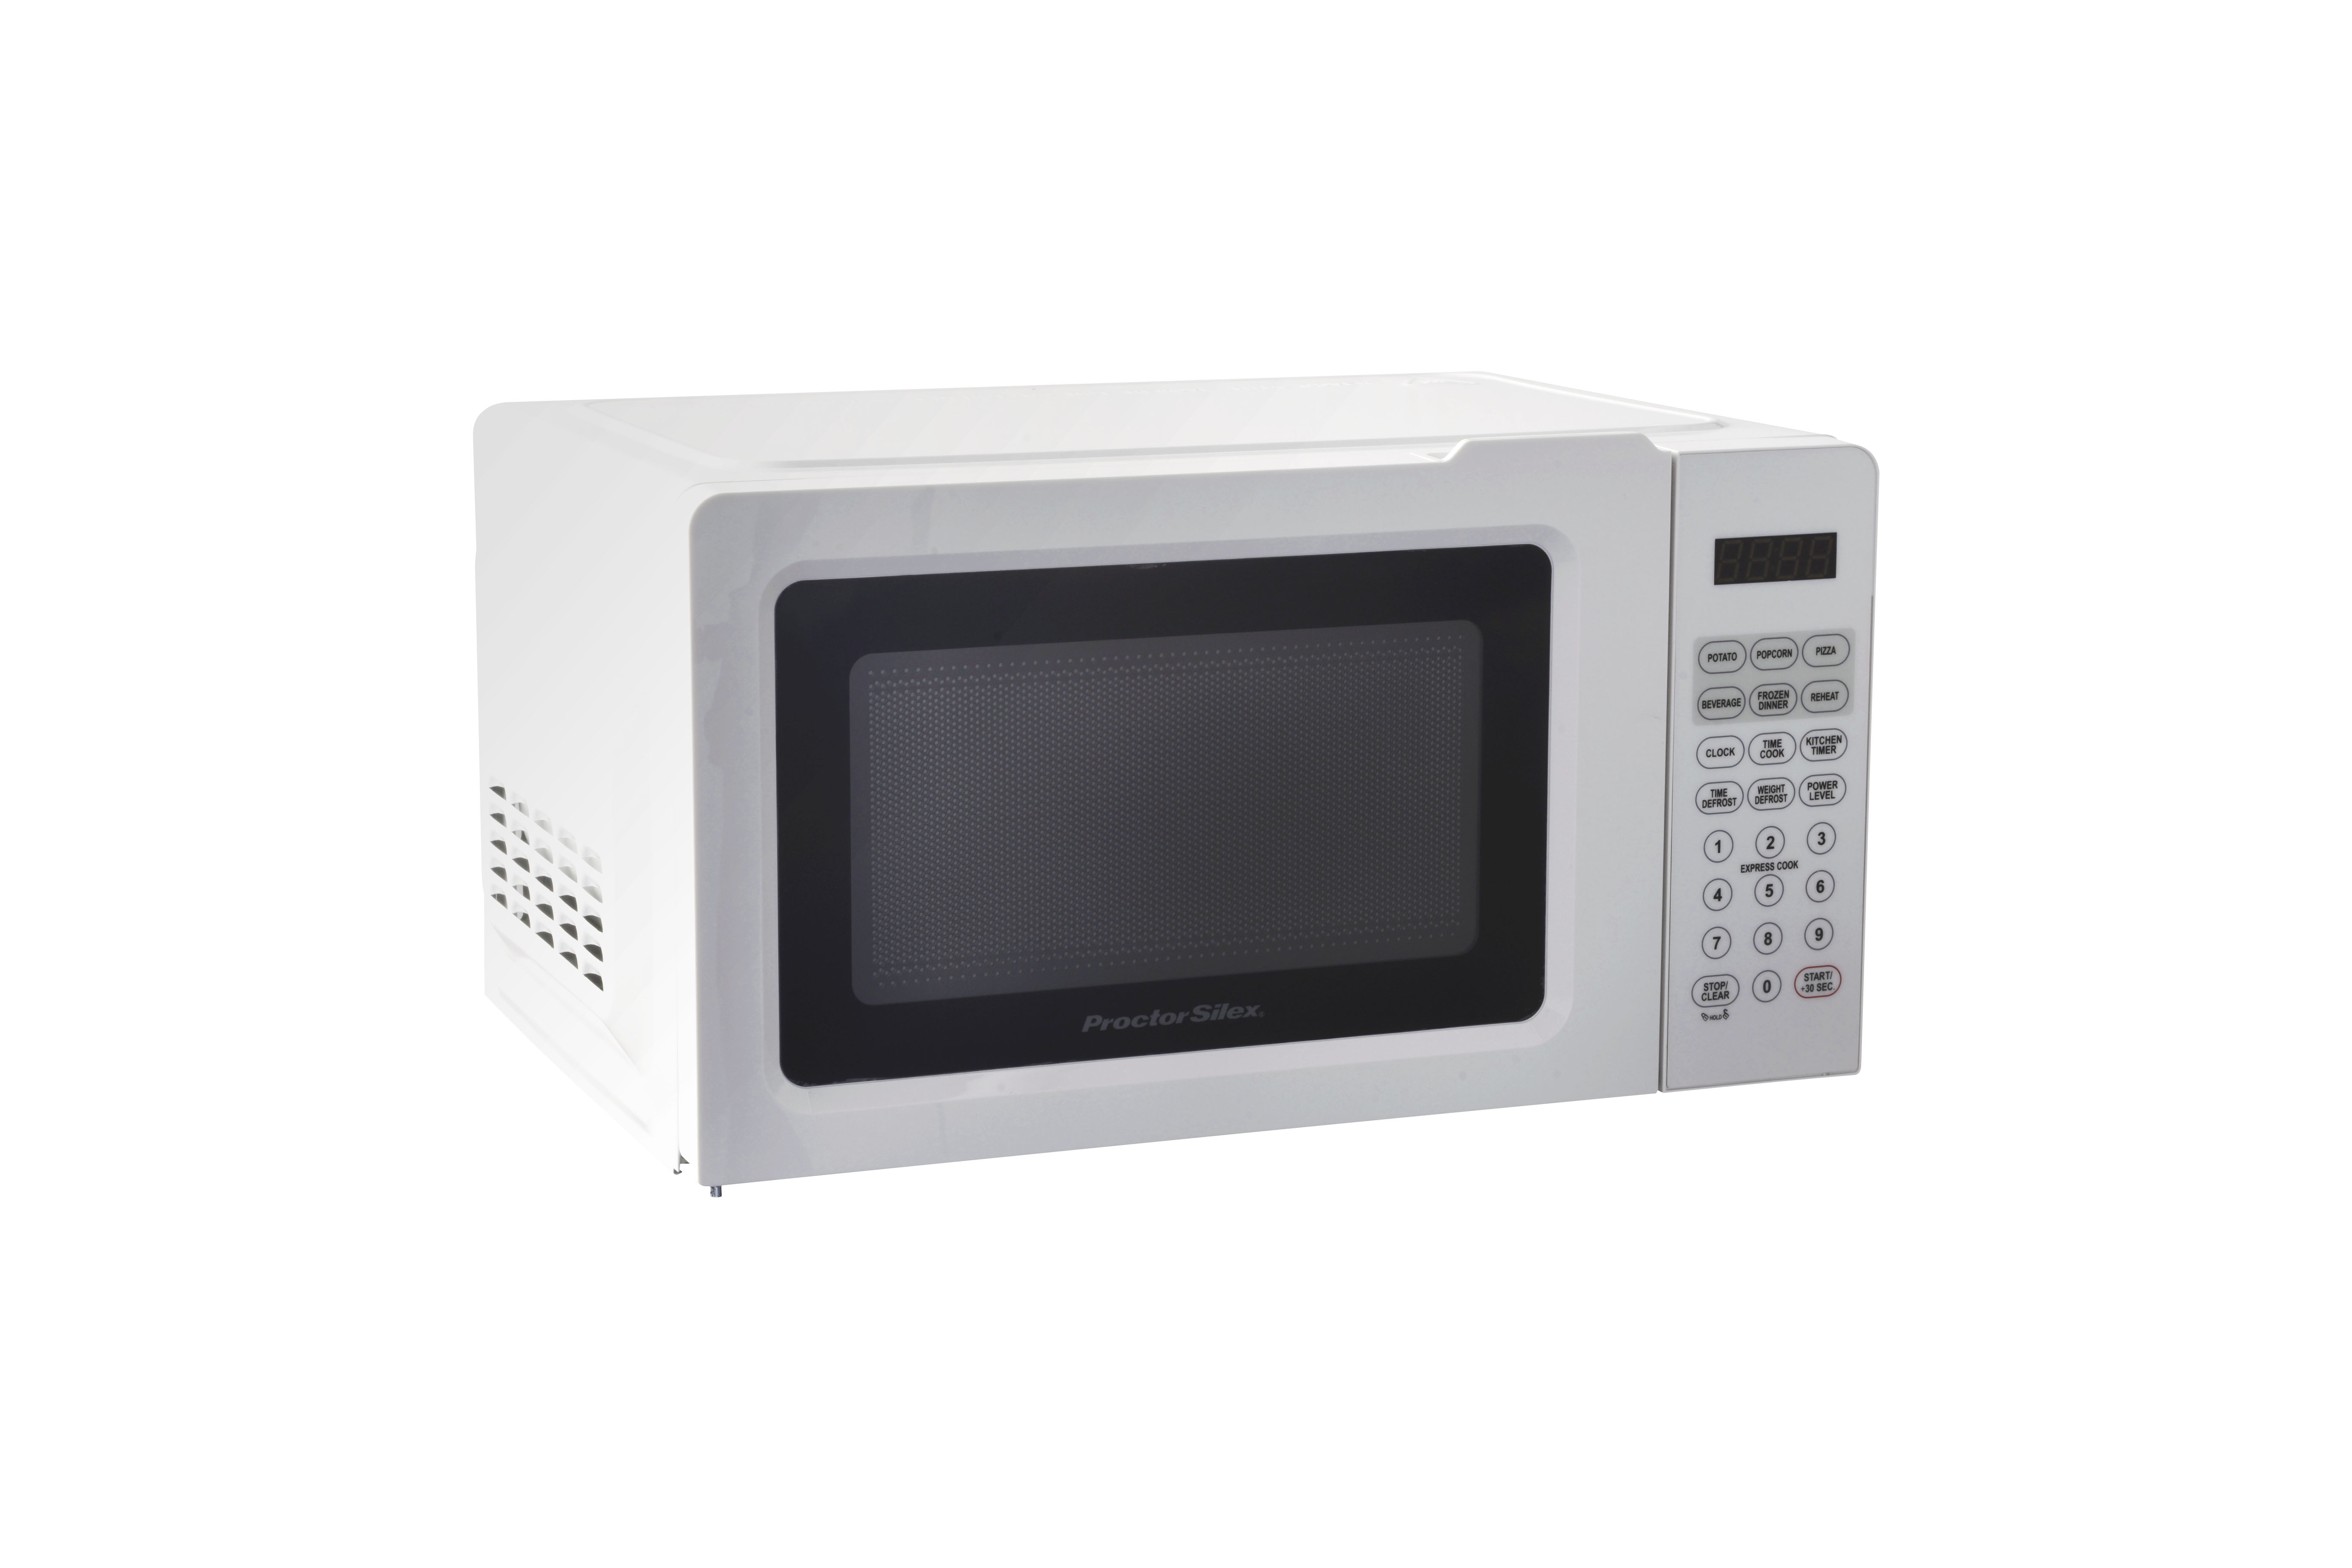 Details about   Small Table Top Digital Microwave Oven 0.7 Cu.ft Black Defrosts and Cooks Food 